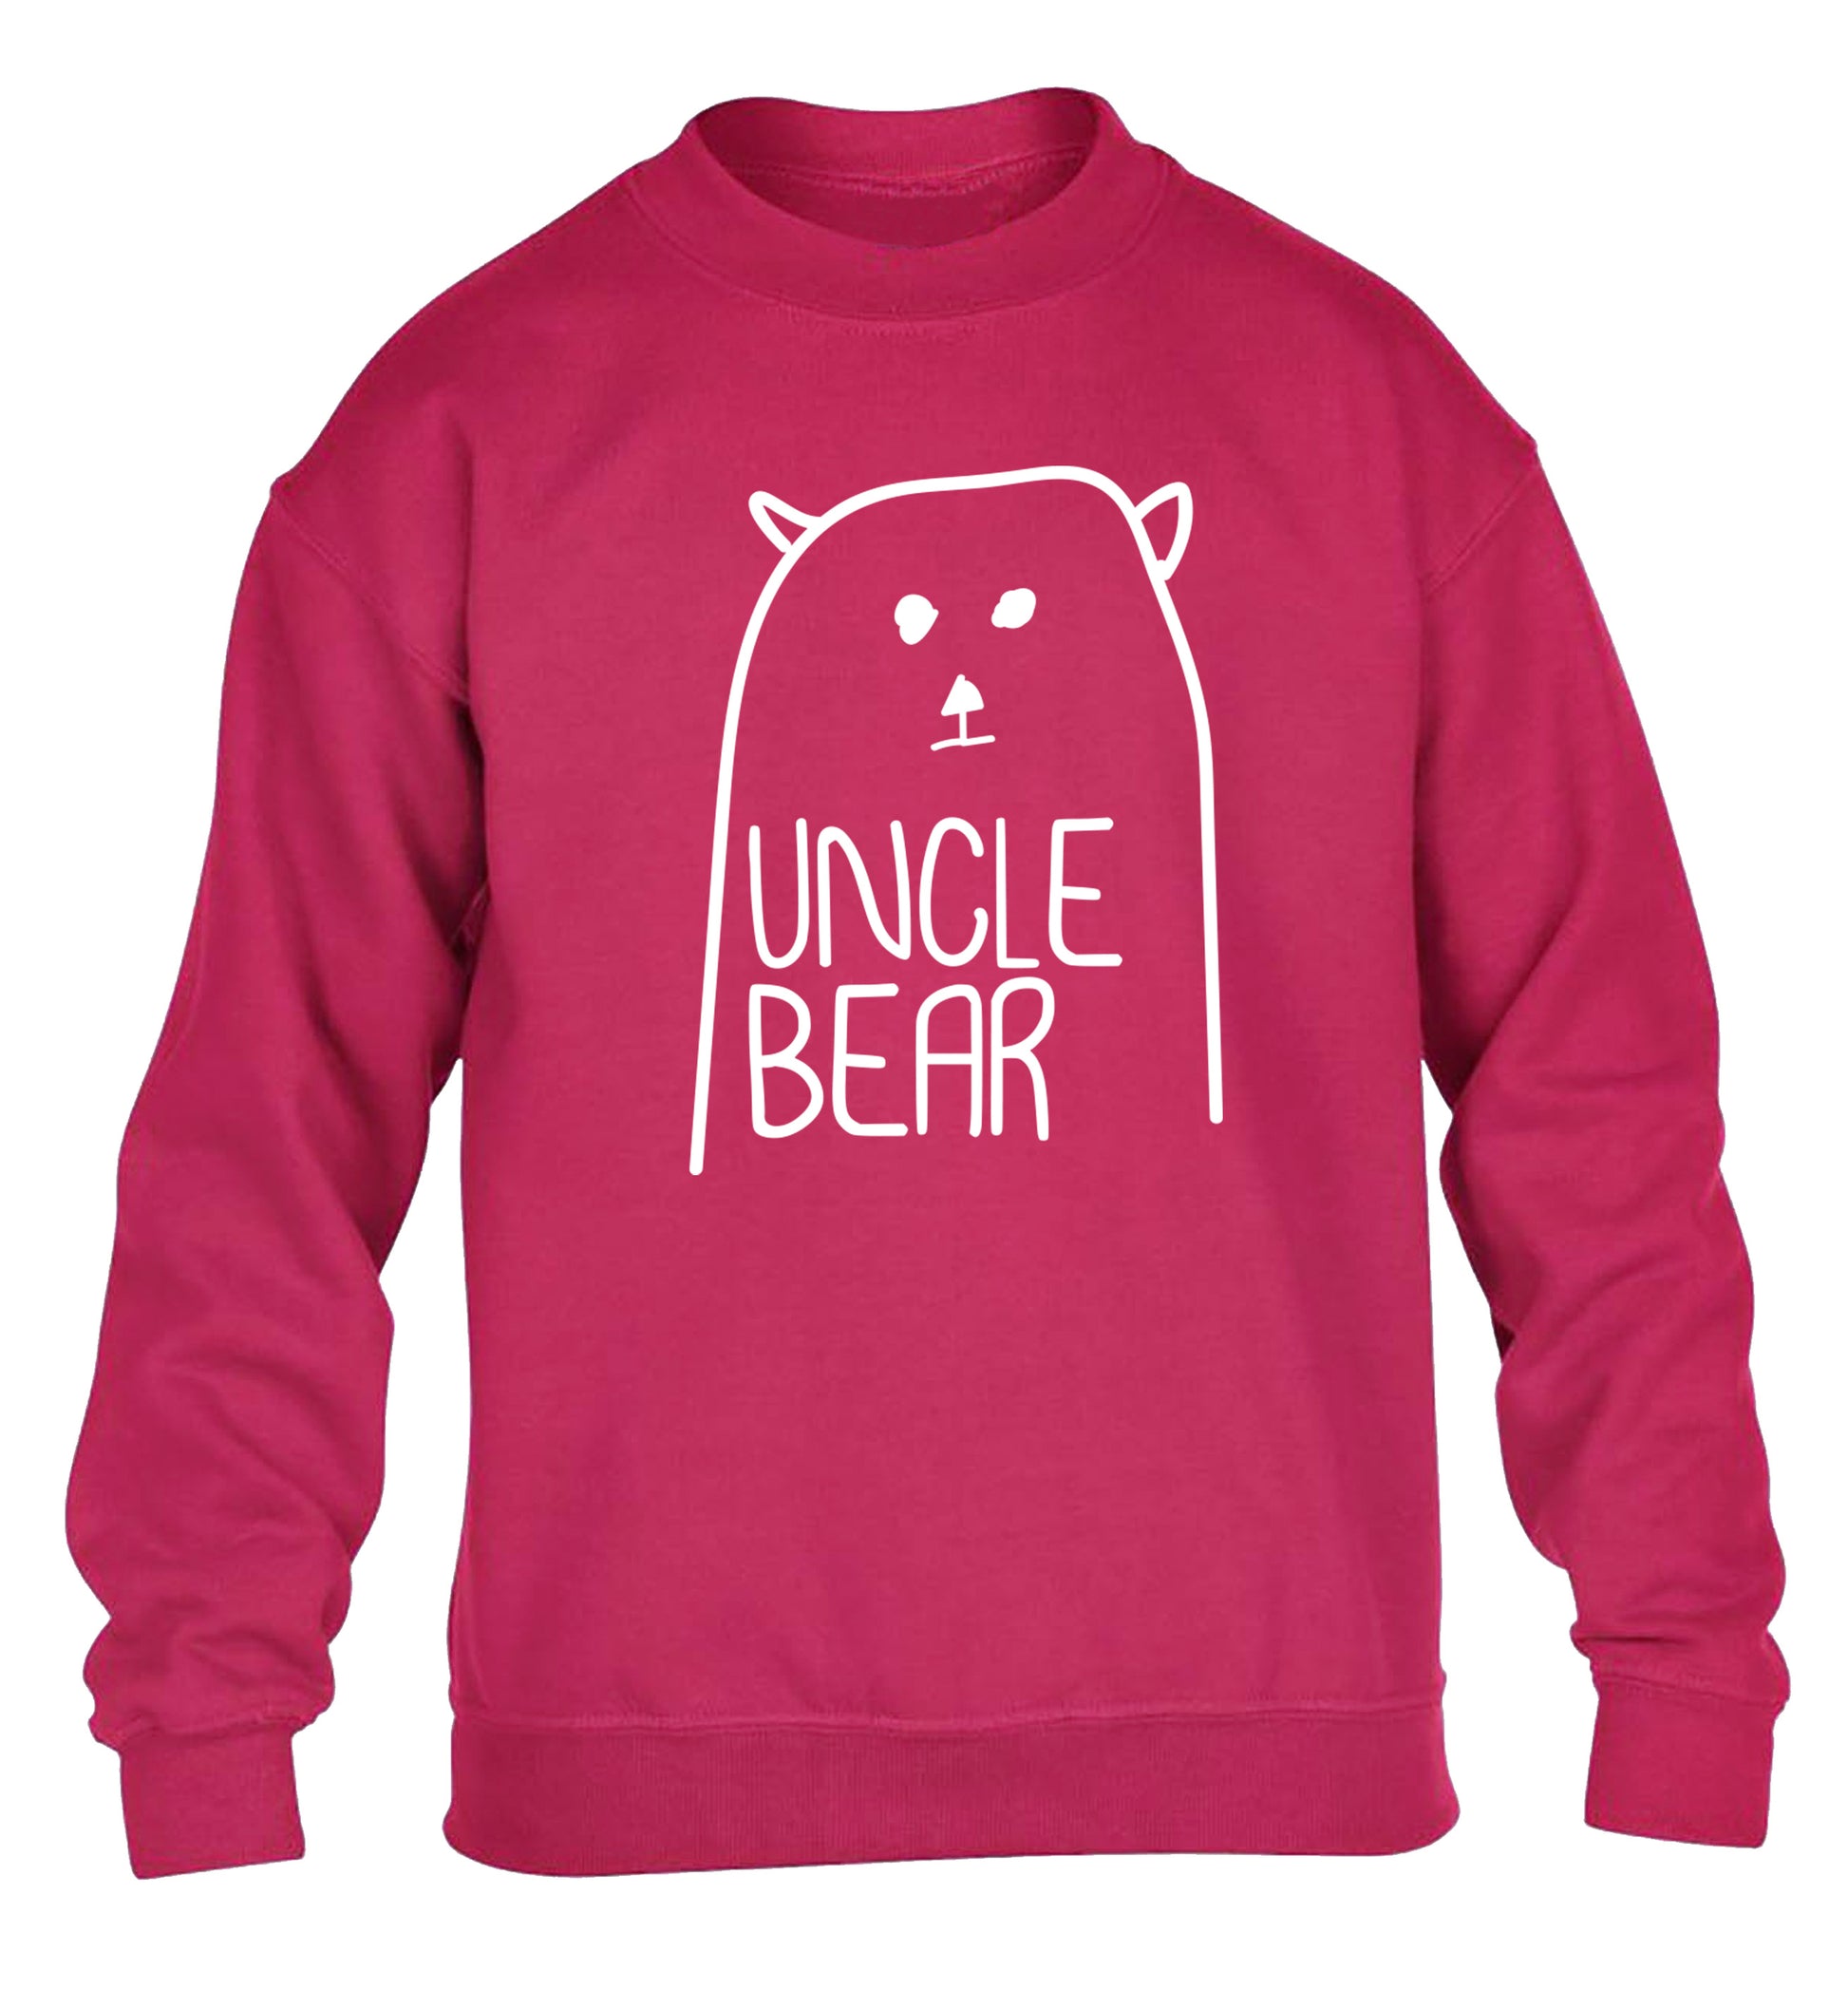 Uncle bear children's pink sweater 12-13 Years